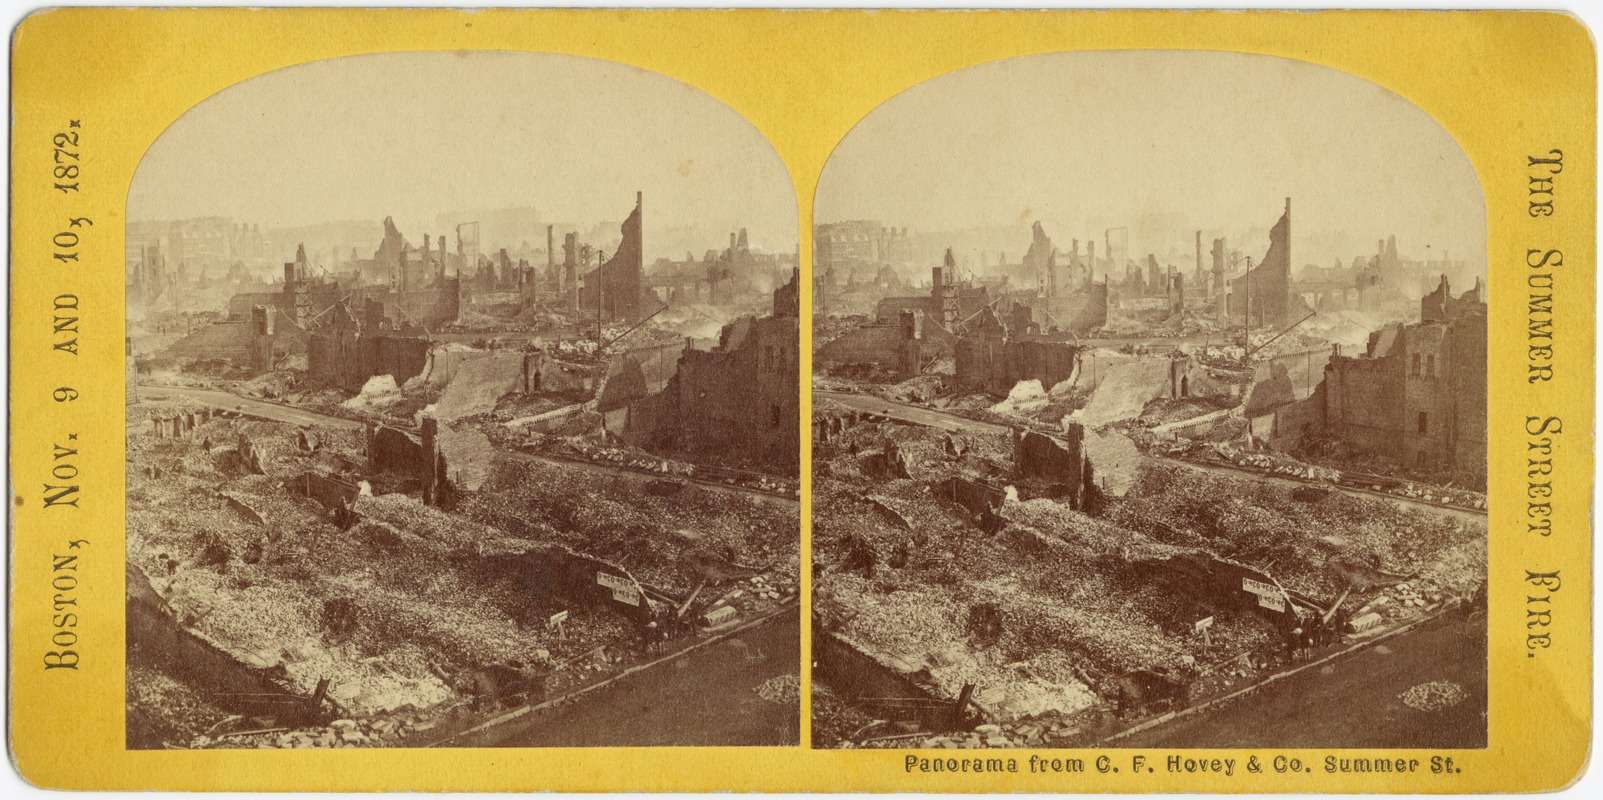 Panorama from C.F. Hovey & Co. Summer St.